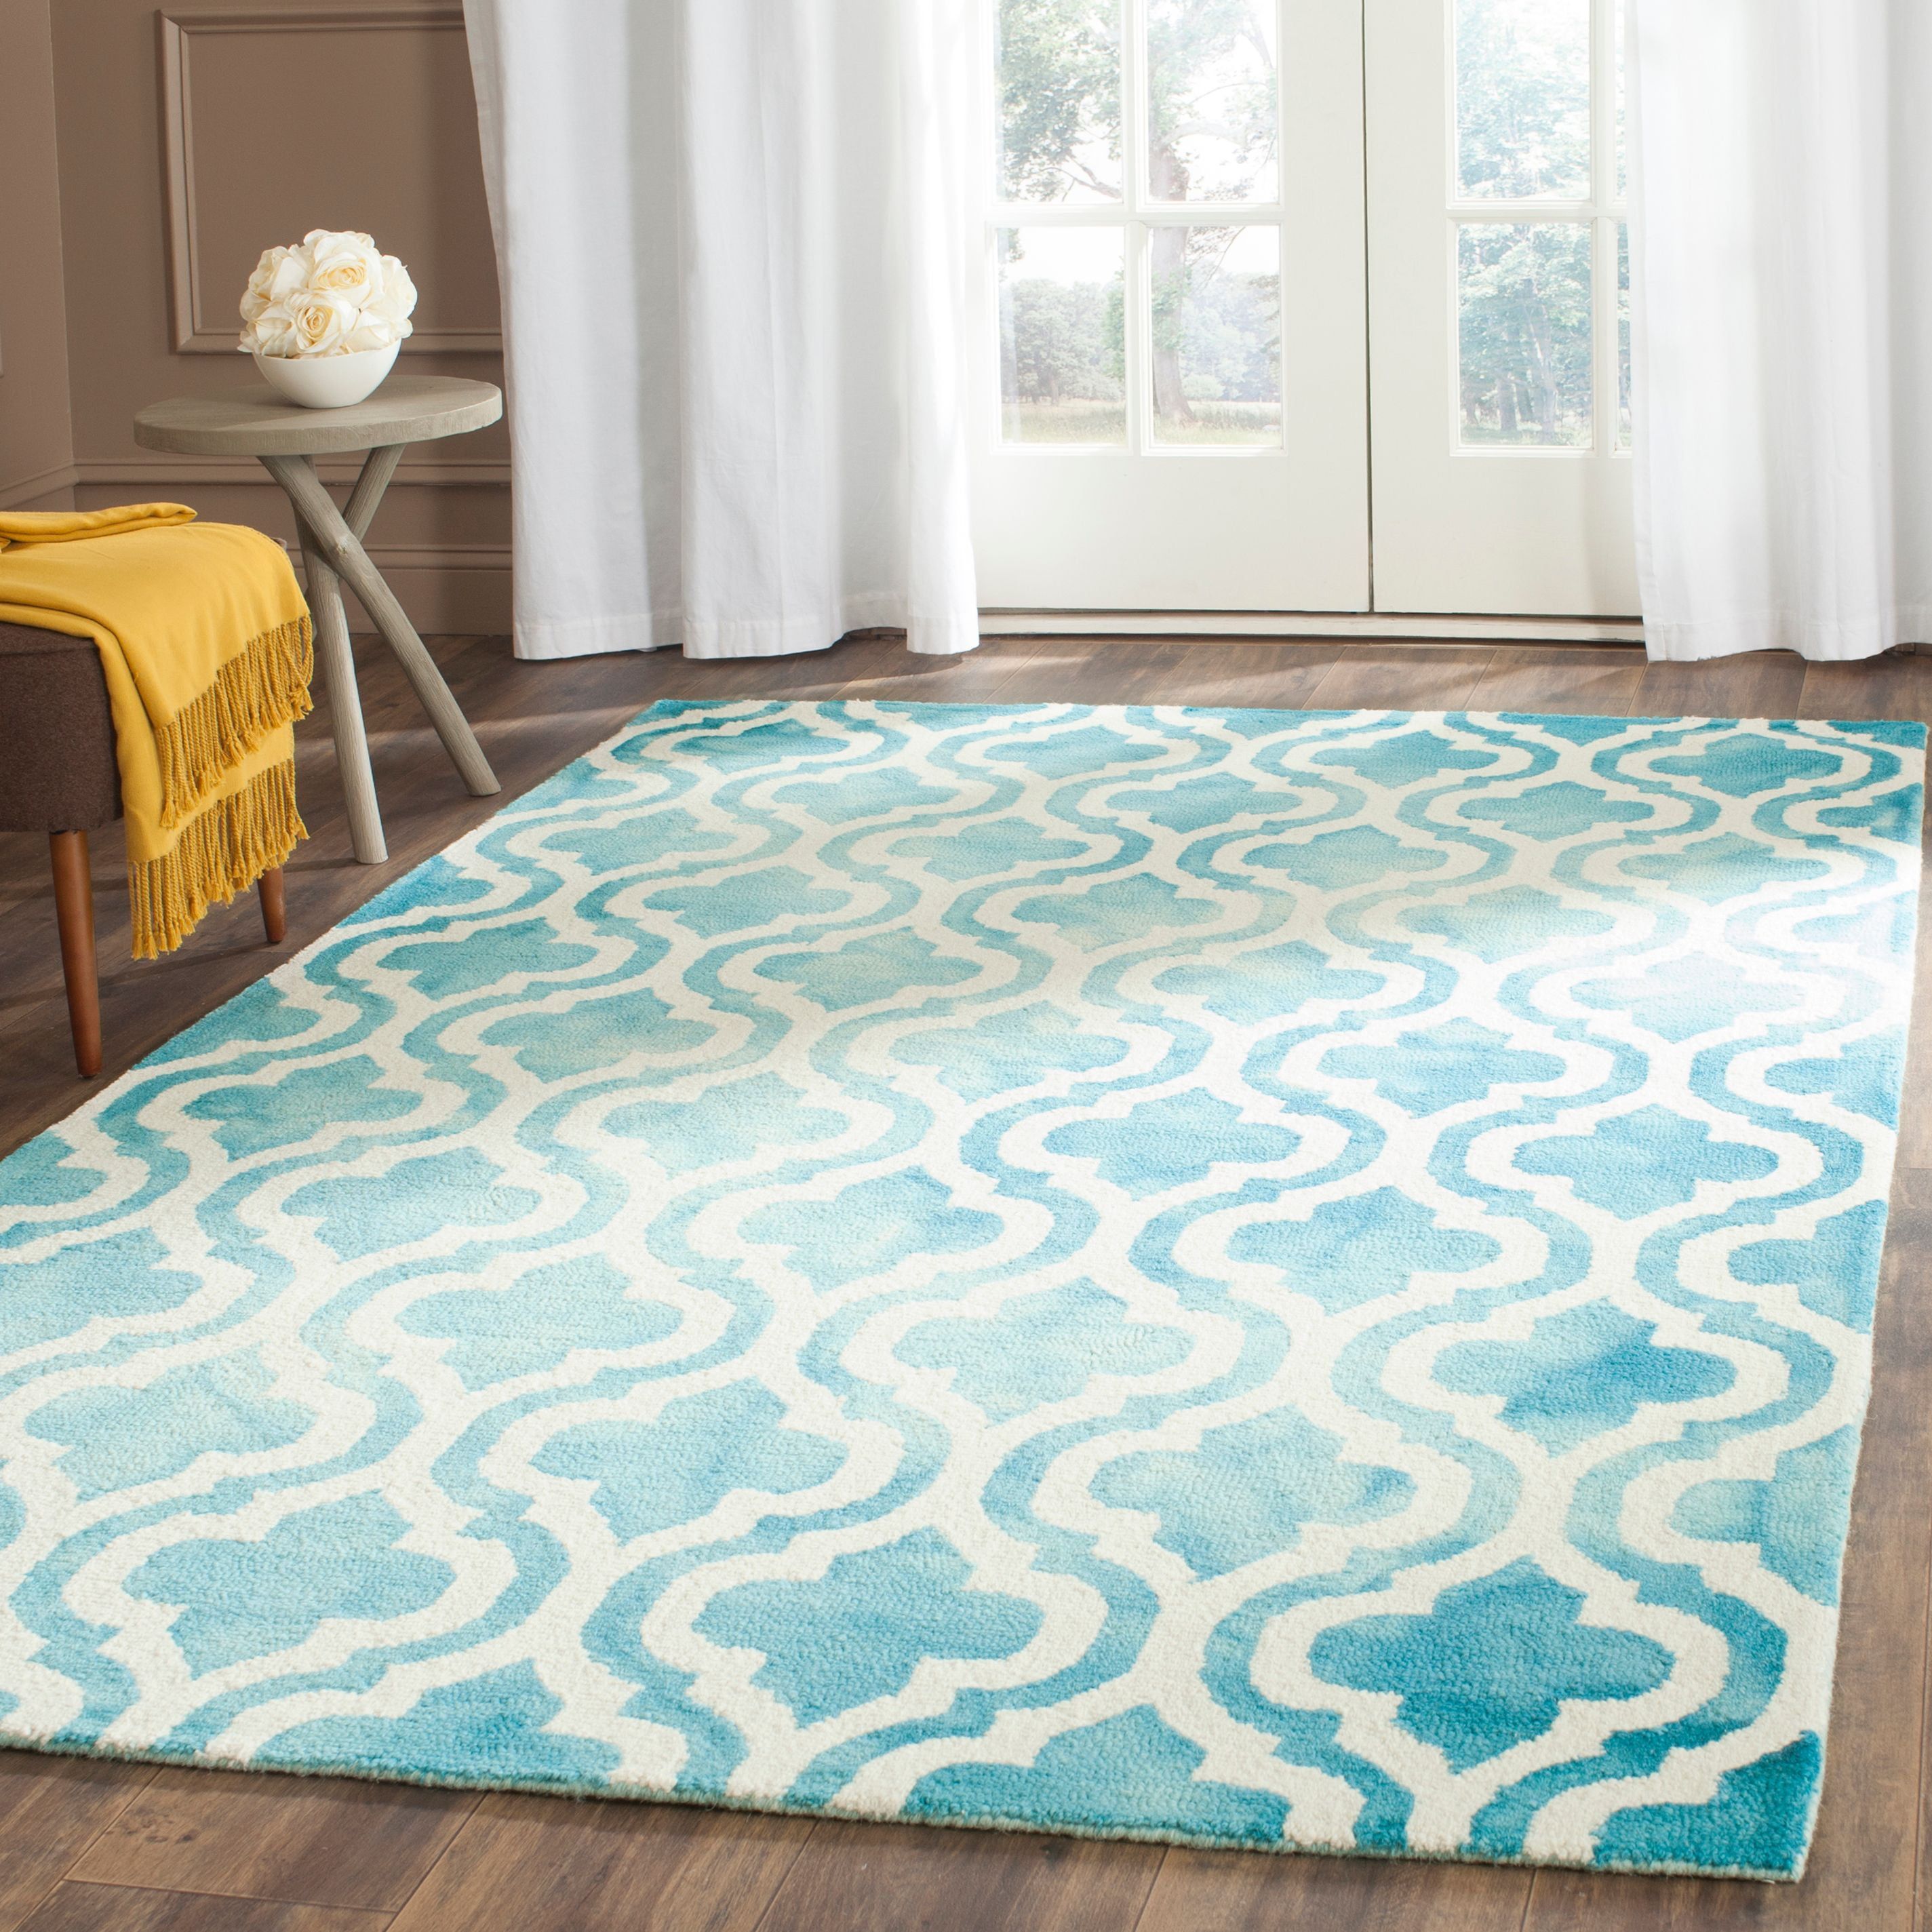 Turquoise/Ivory Hand-Tufted Wool Square Area Rug, 7' x 7'